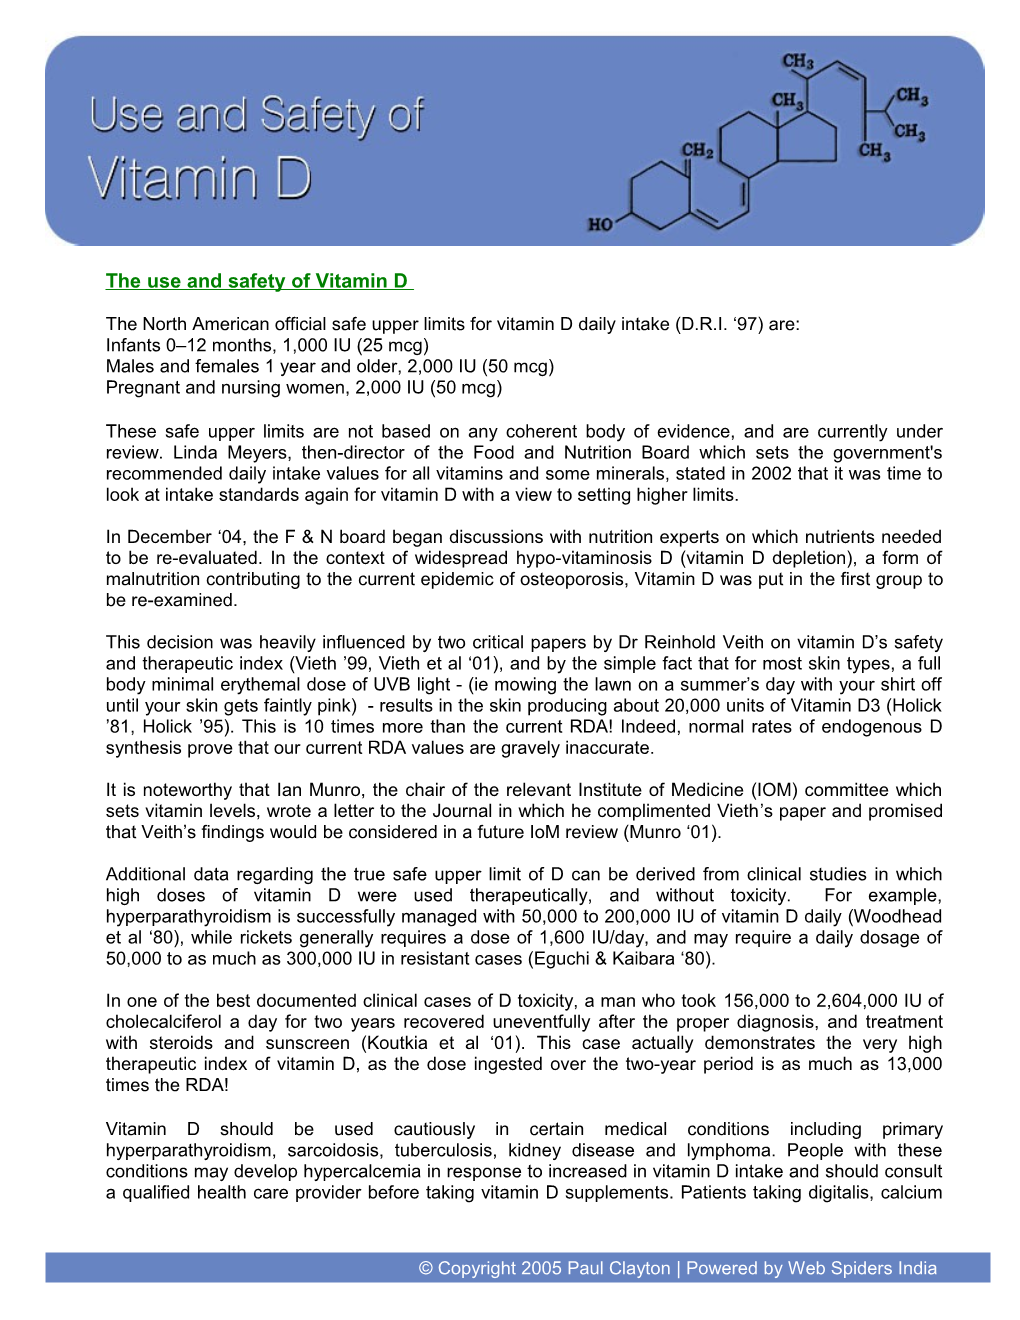 The Use and Safety of Vitamin D